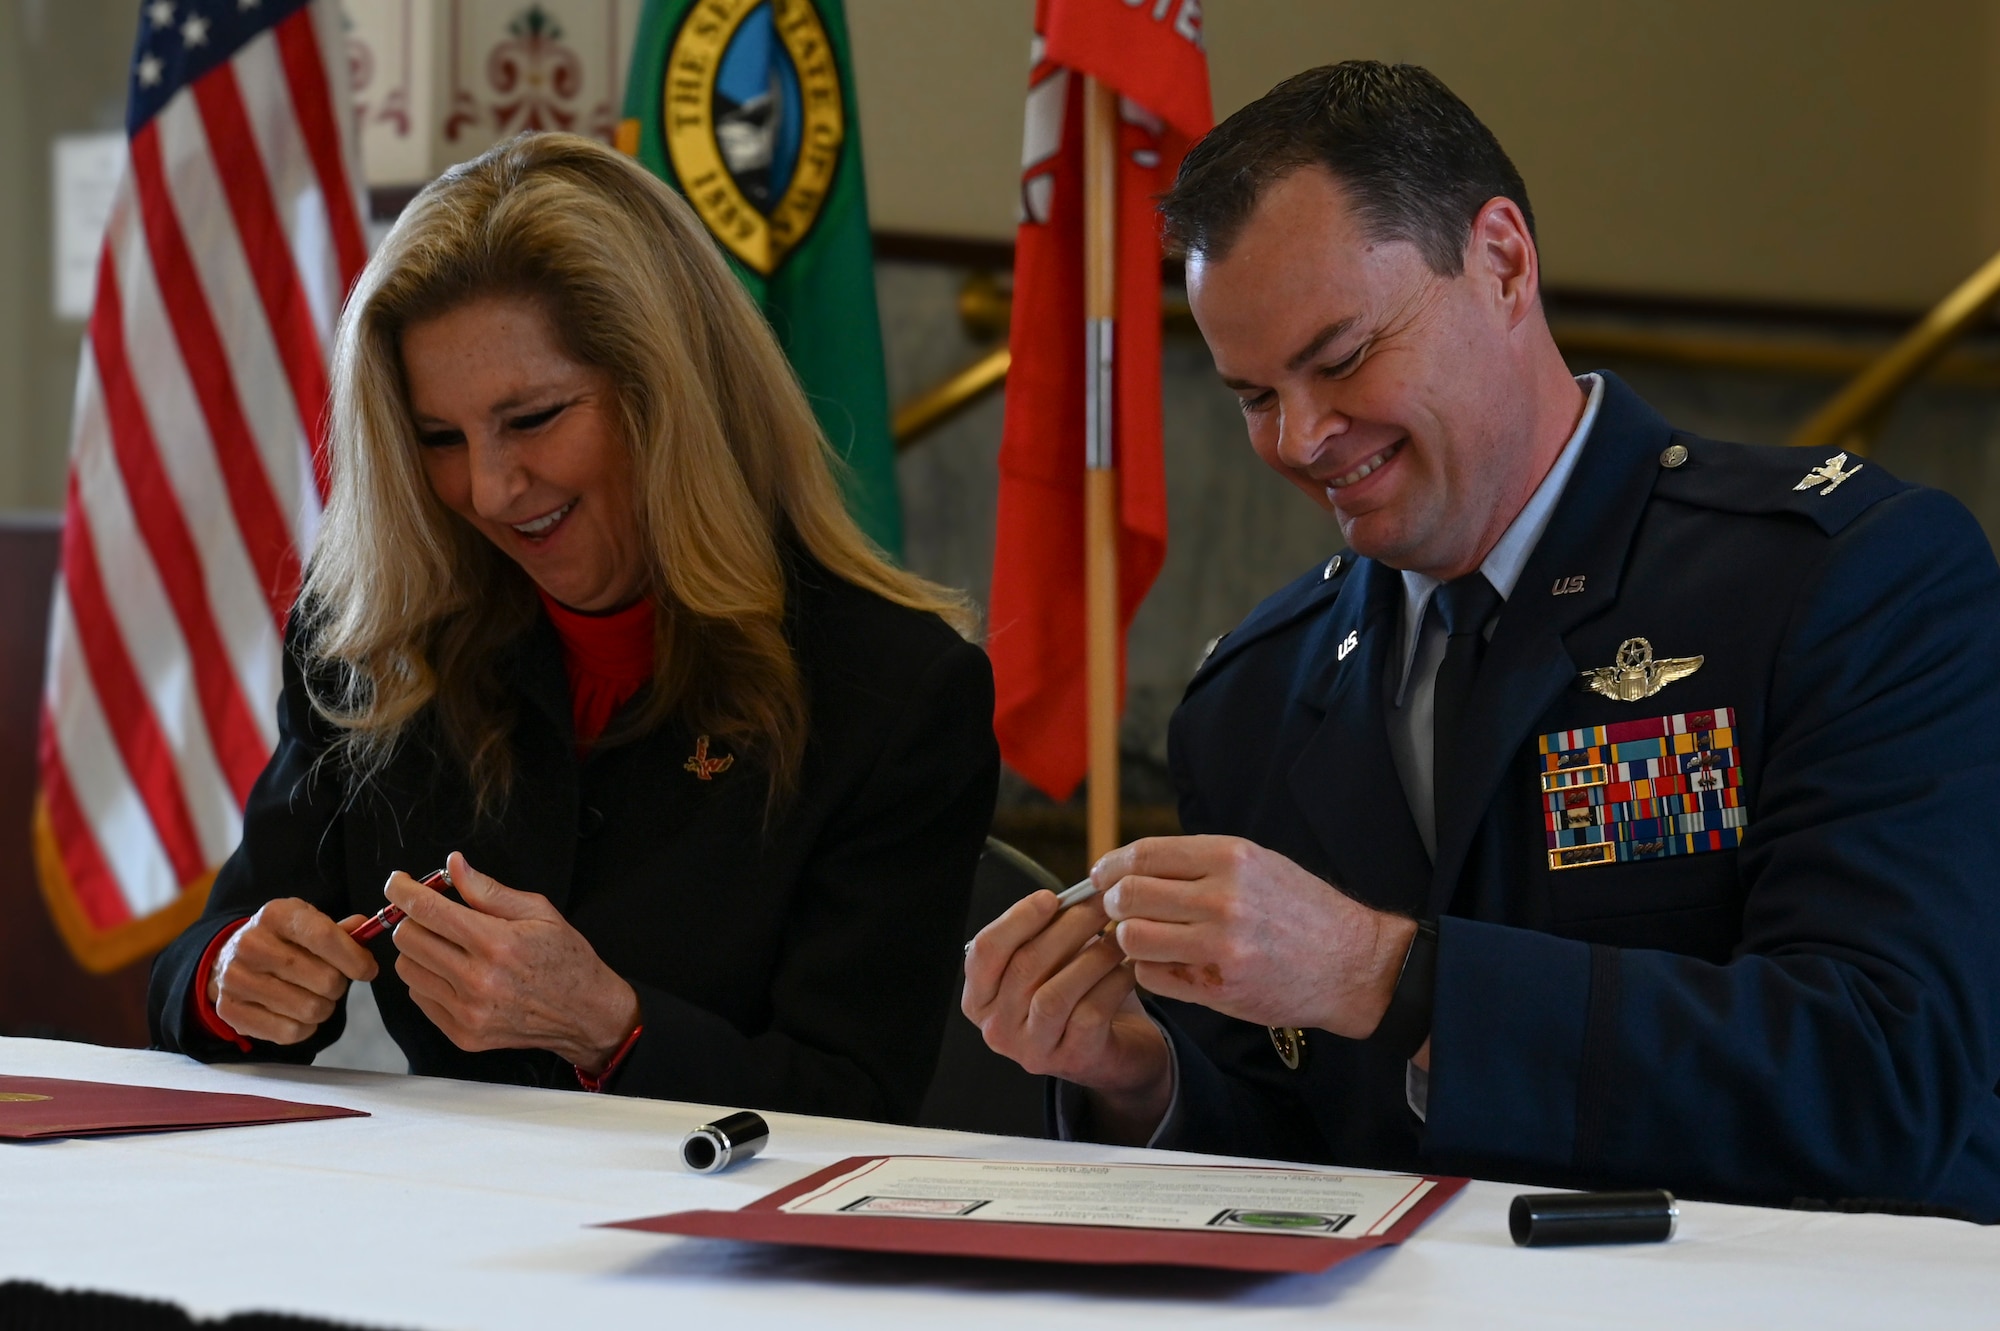 A man and a woman signing documents